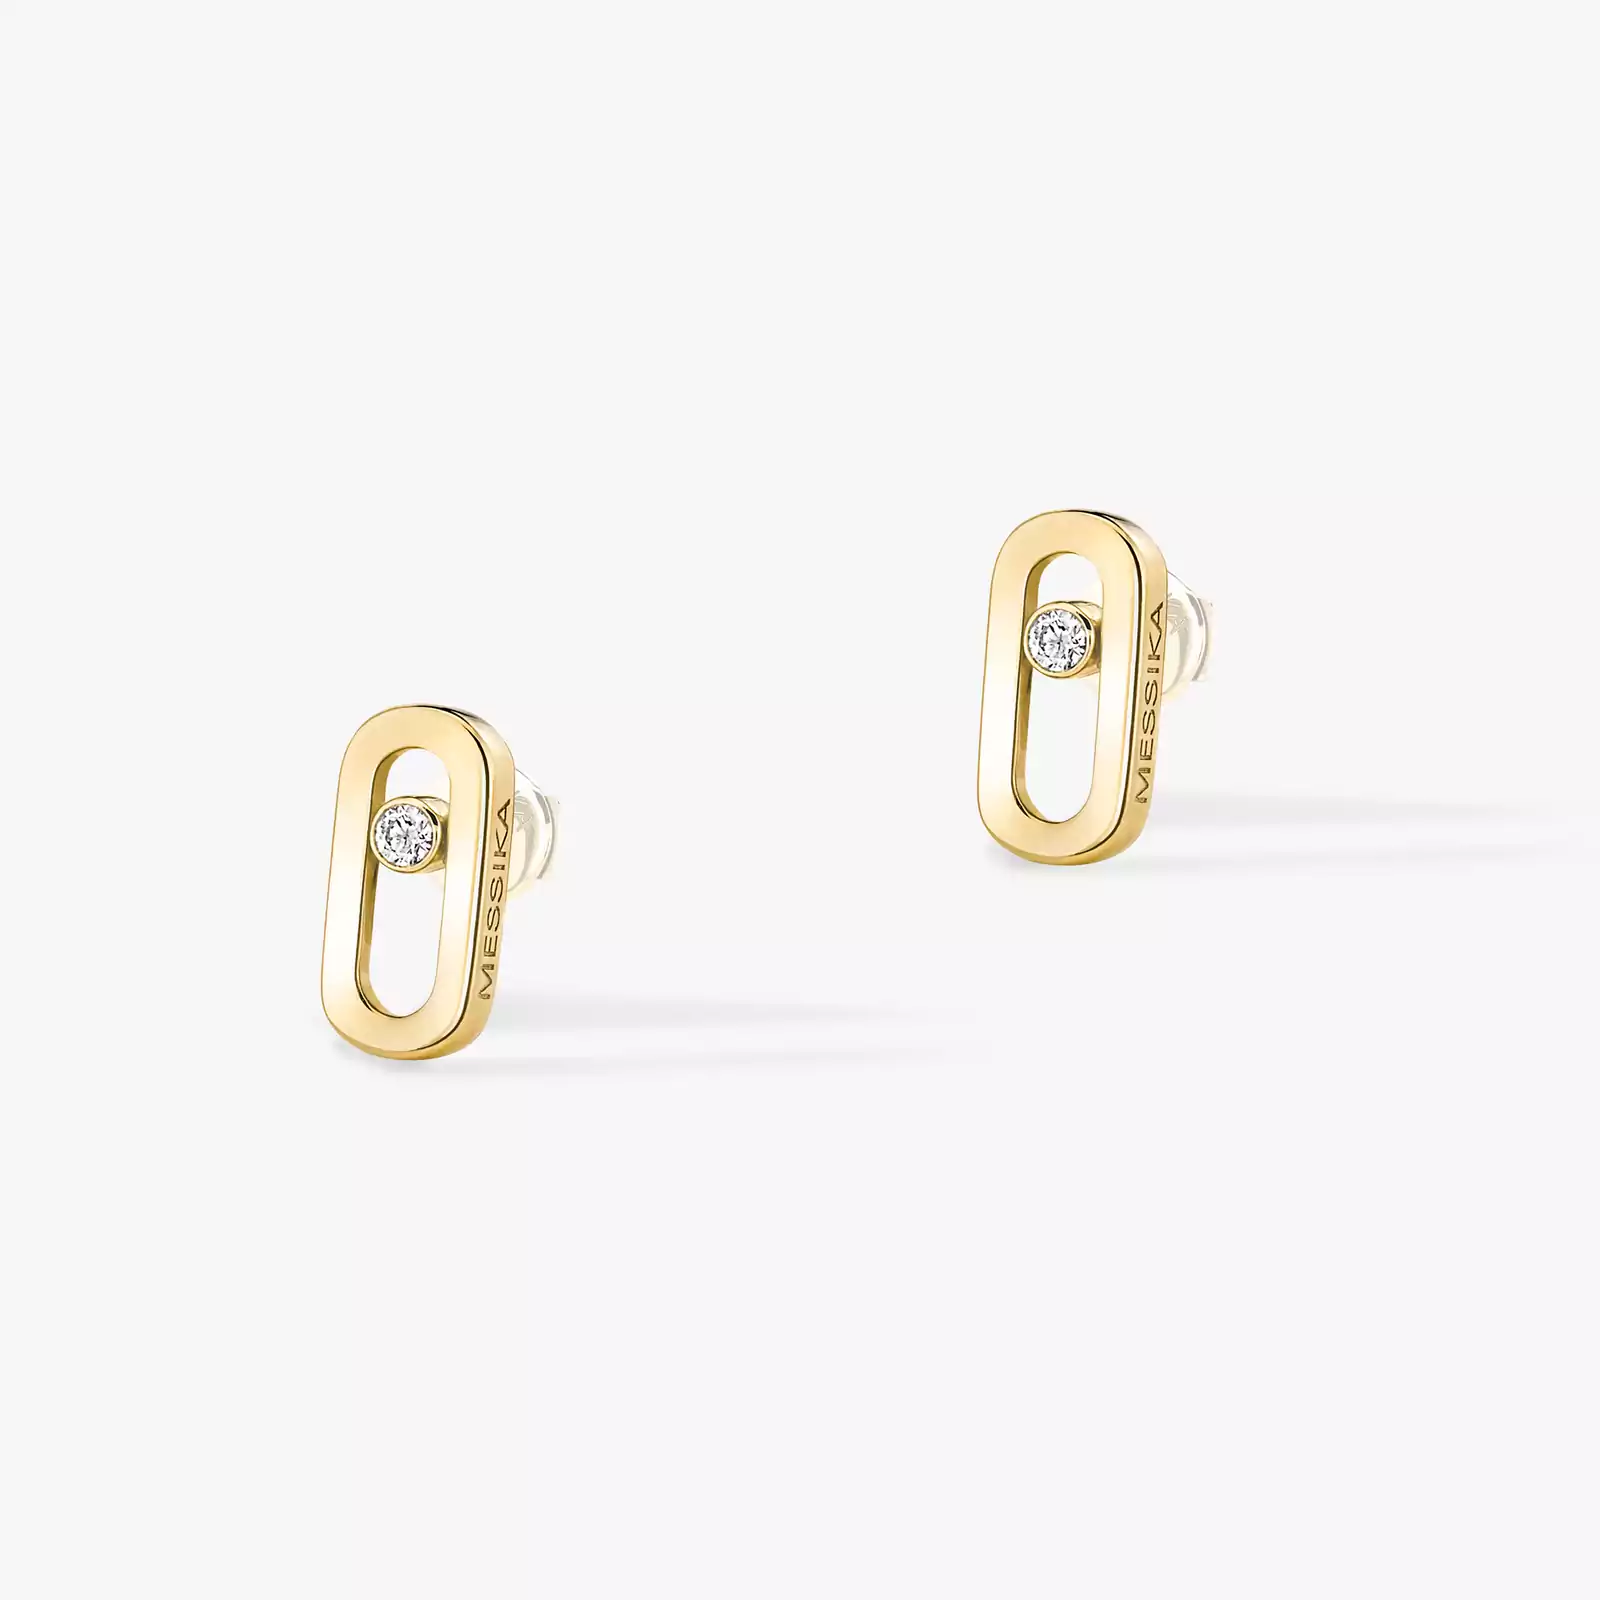 Gold Move Uno Stud Earrings Yellow Gold For Her Diamond Earrings 12305-YG